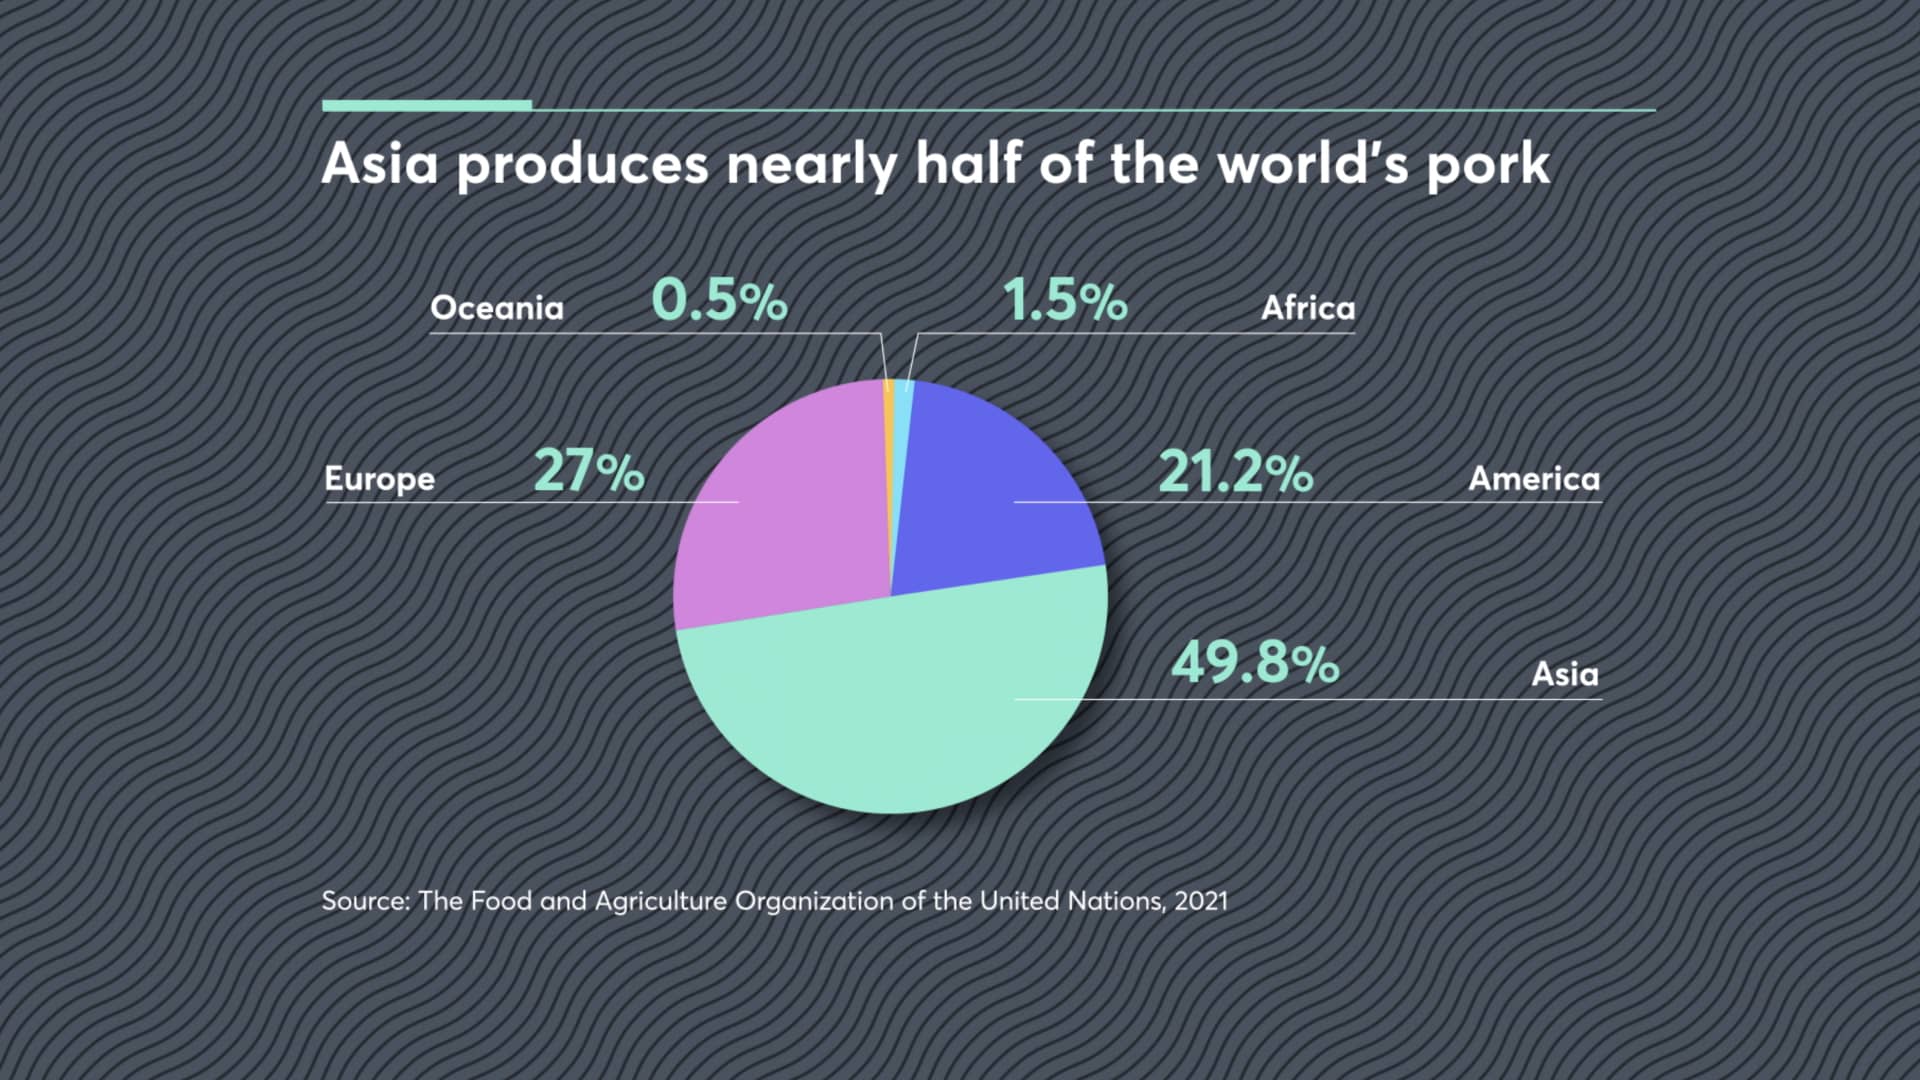 Asia is responsible for producing and consuming half of the world's pork.